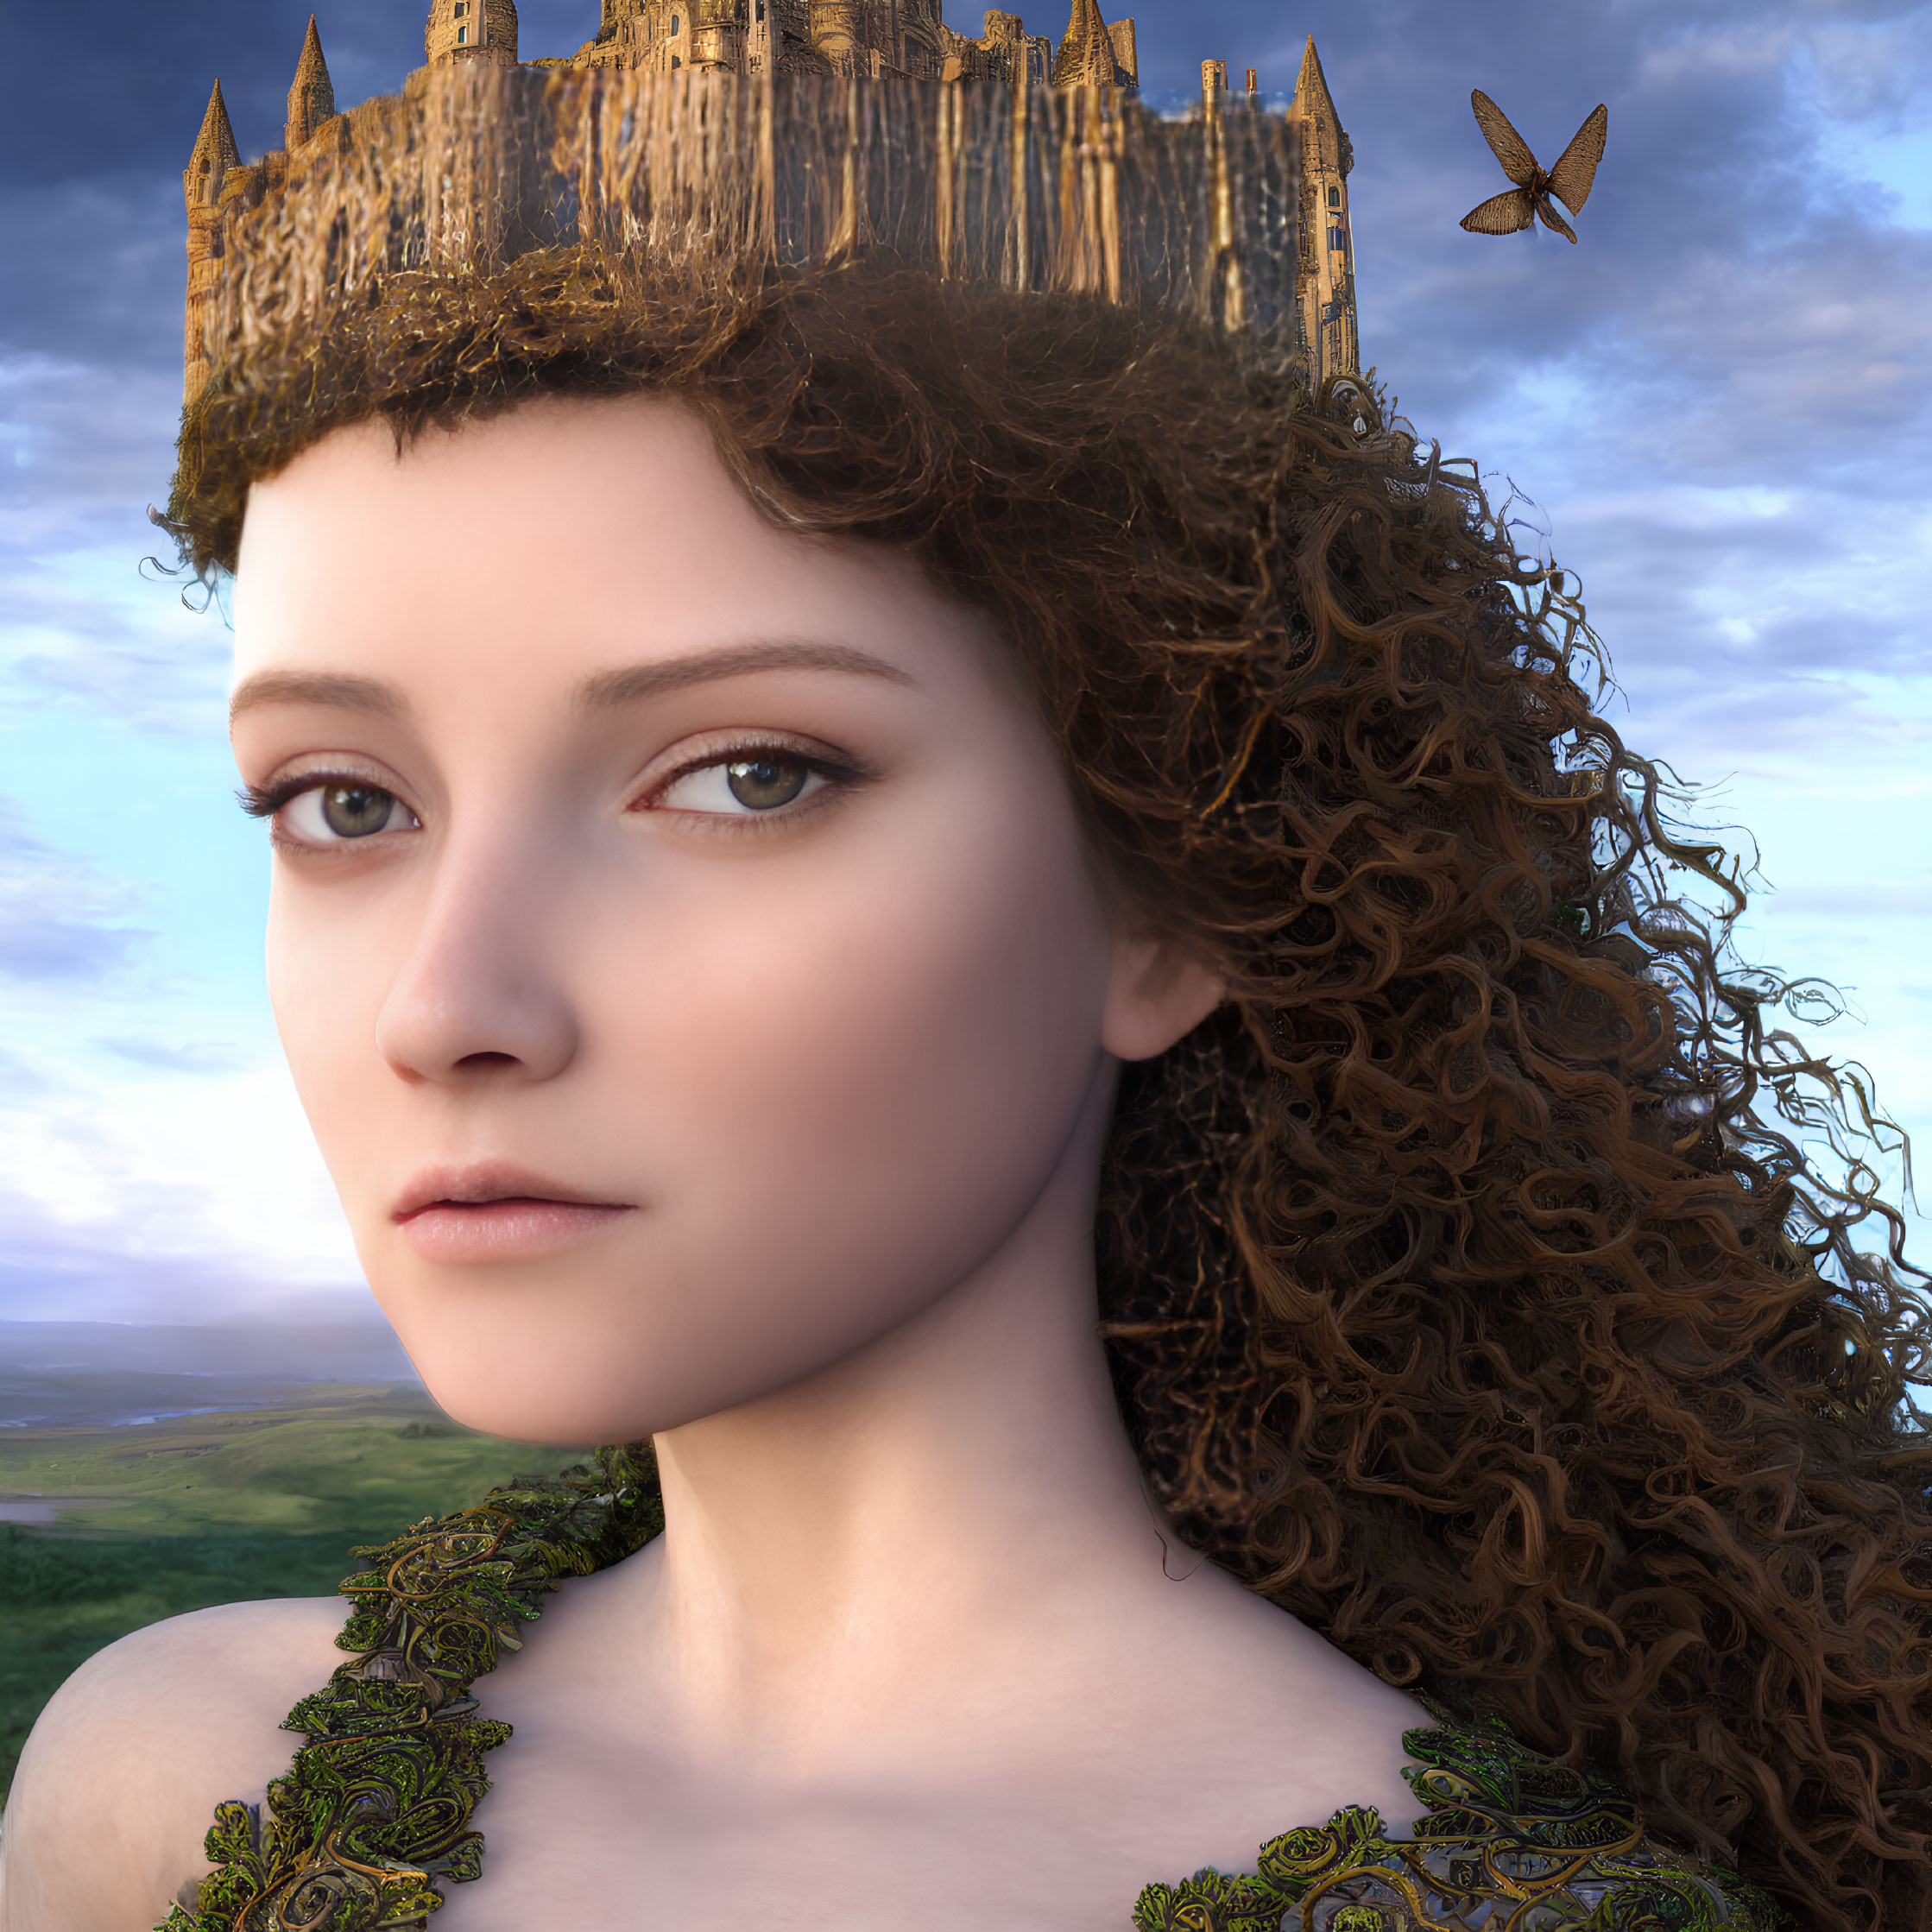 Portrait of young woman with curly hair, castle backdrop, butterfly, and green garment